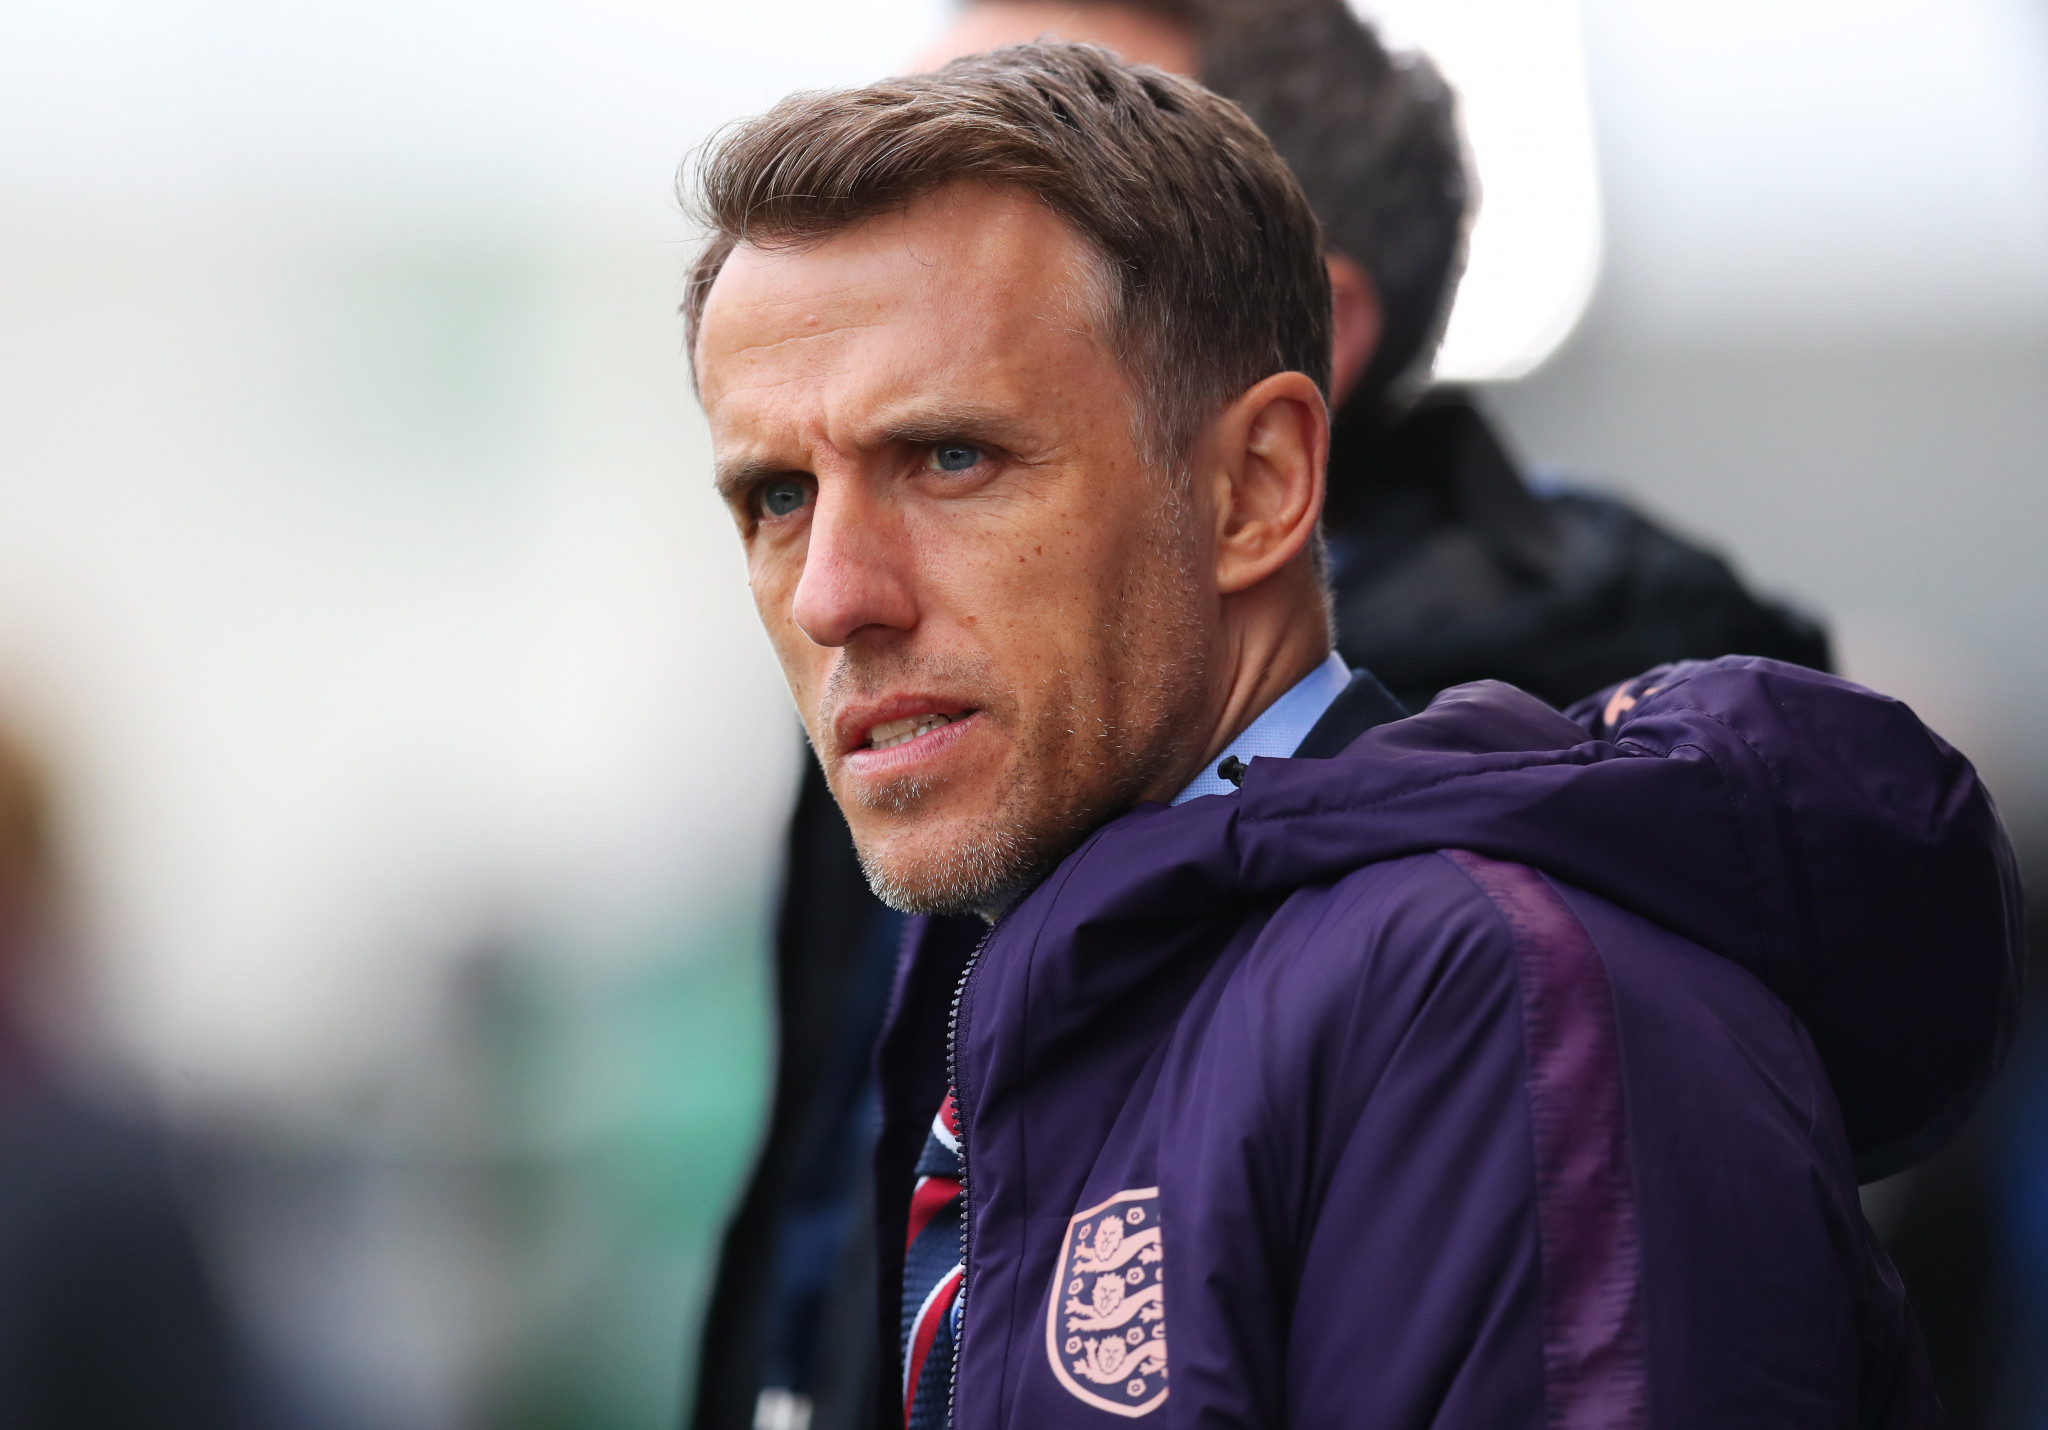 England women's manager Phil Neville has called for Premier League clubs to open their stadiums for women's matches ©Getty Images